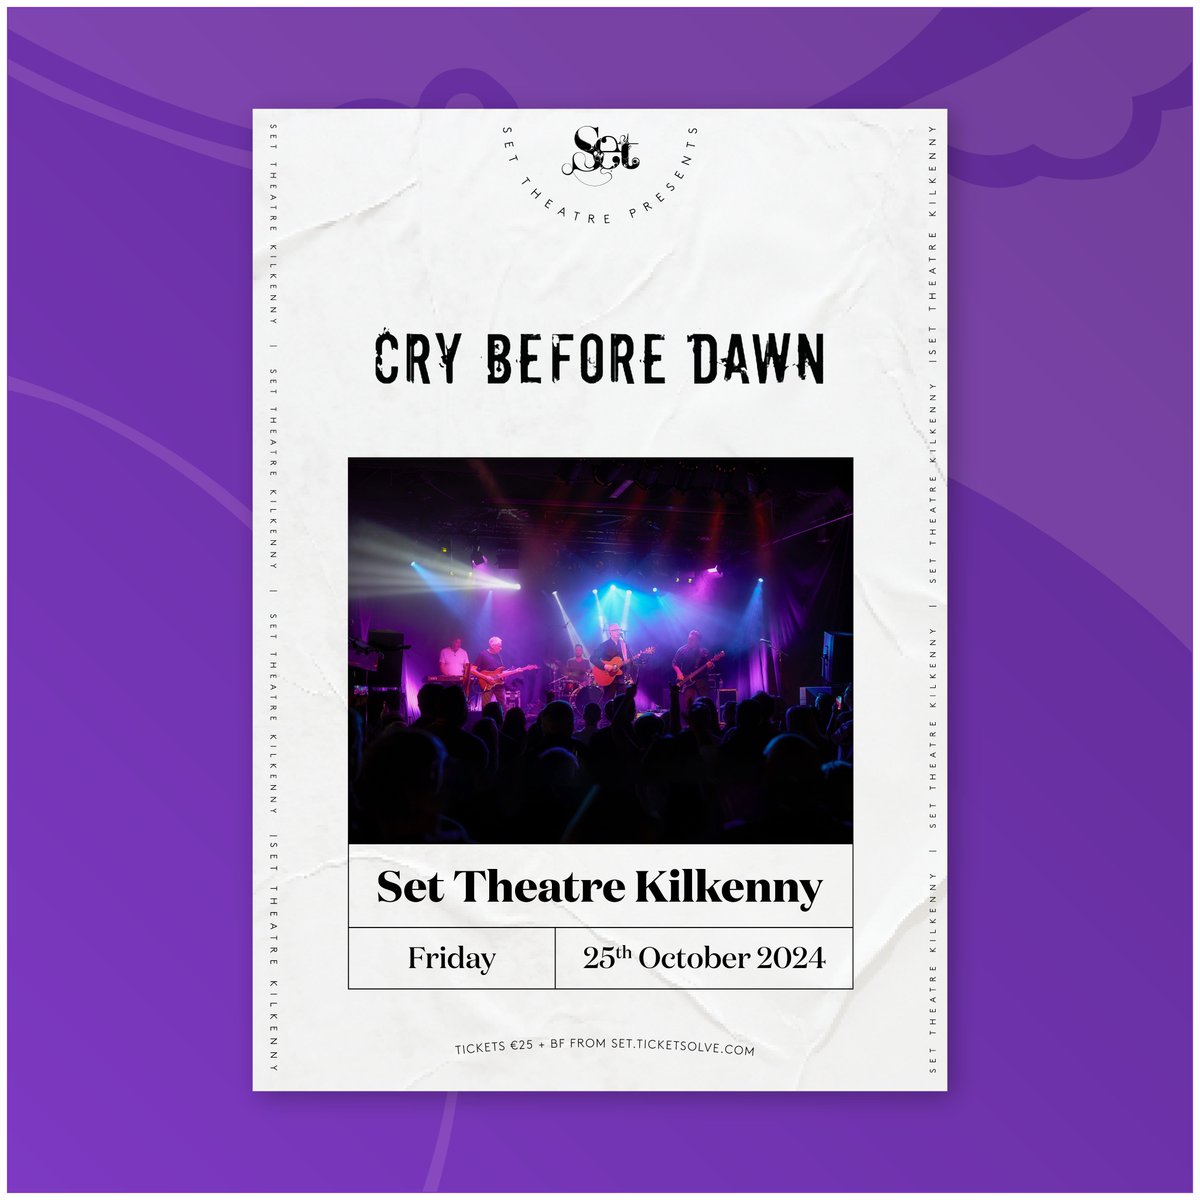 𝗢 𝗡 • 𝗦 𝗔 𝗟 𝗘 • 𝗡 𝗢 𝗪 Cry Before Dawn Friday 25 October Set Theatre Kilkenny Tickets set.ticketsolve.com/shows/11736556…